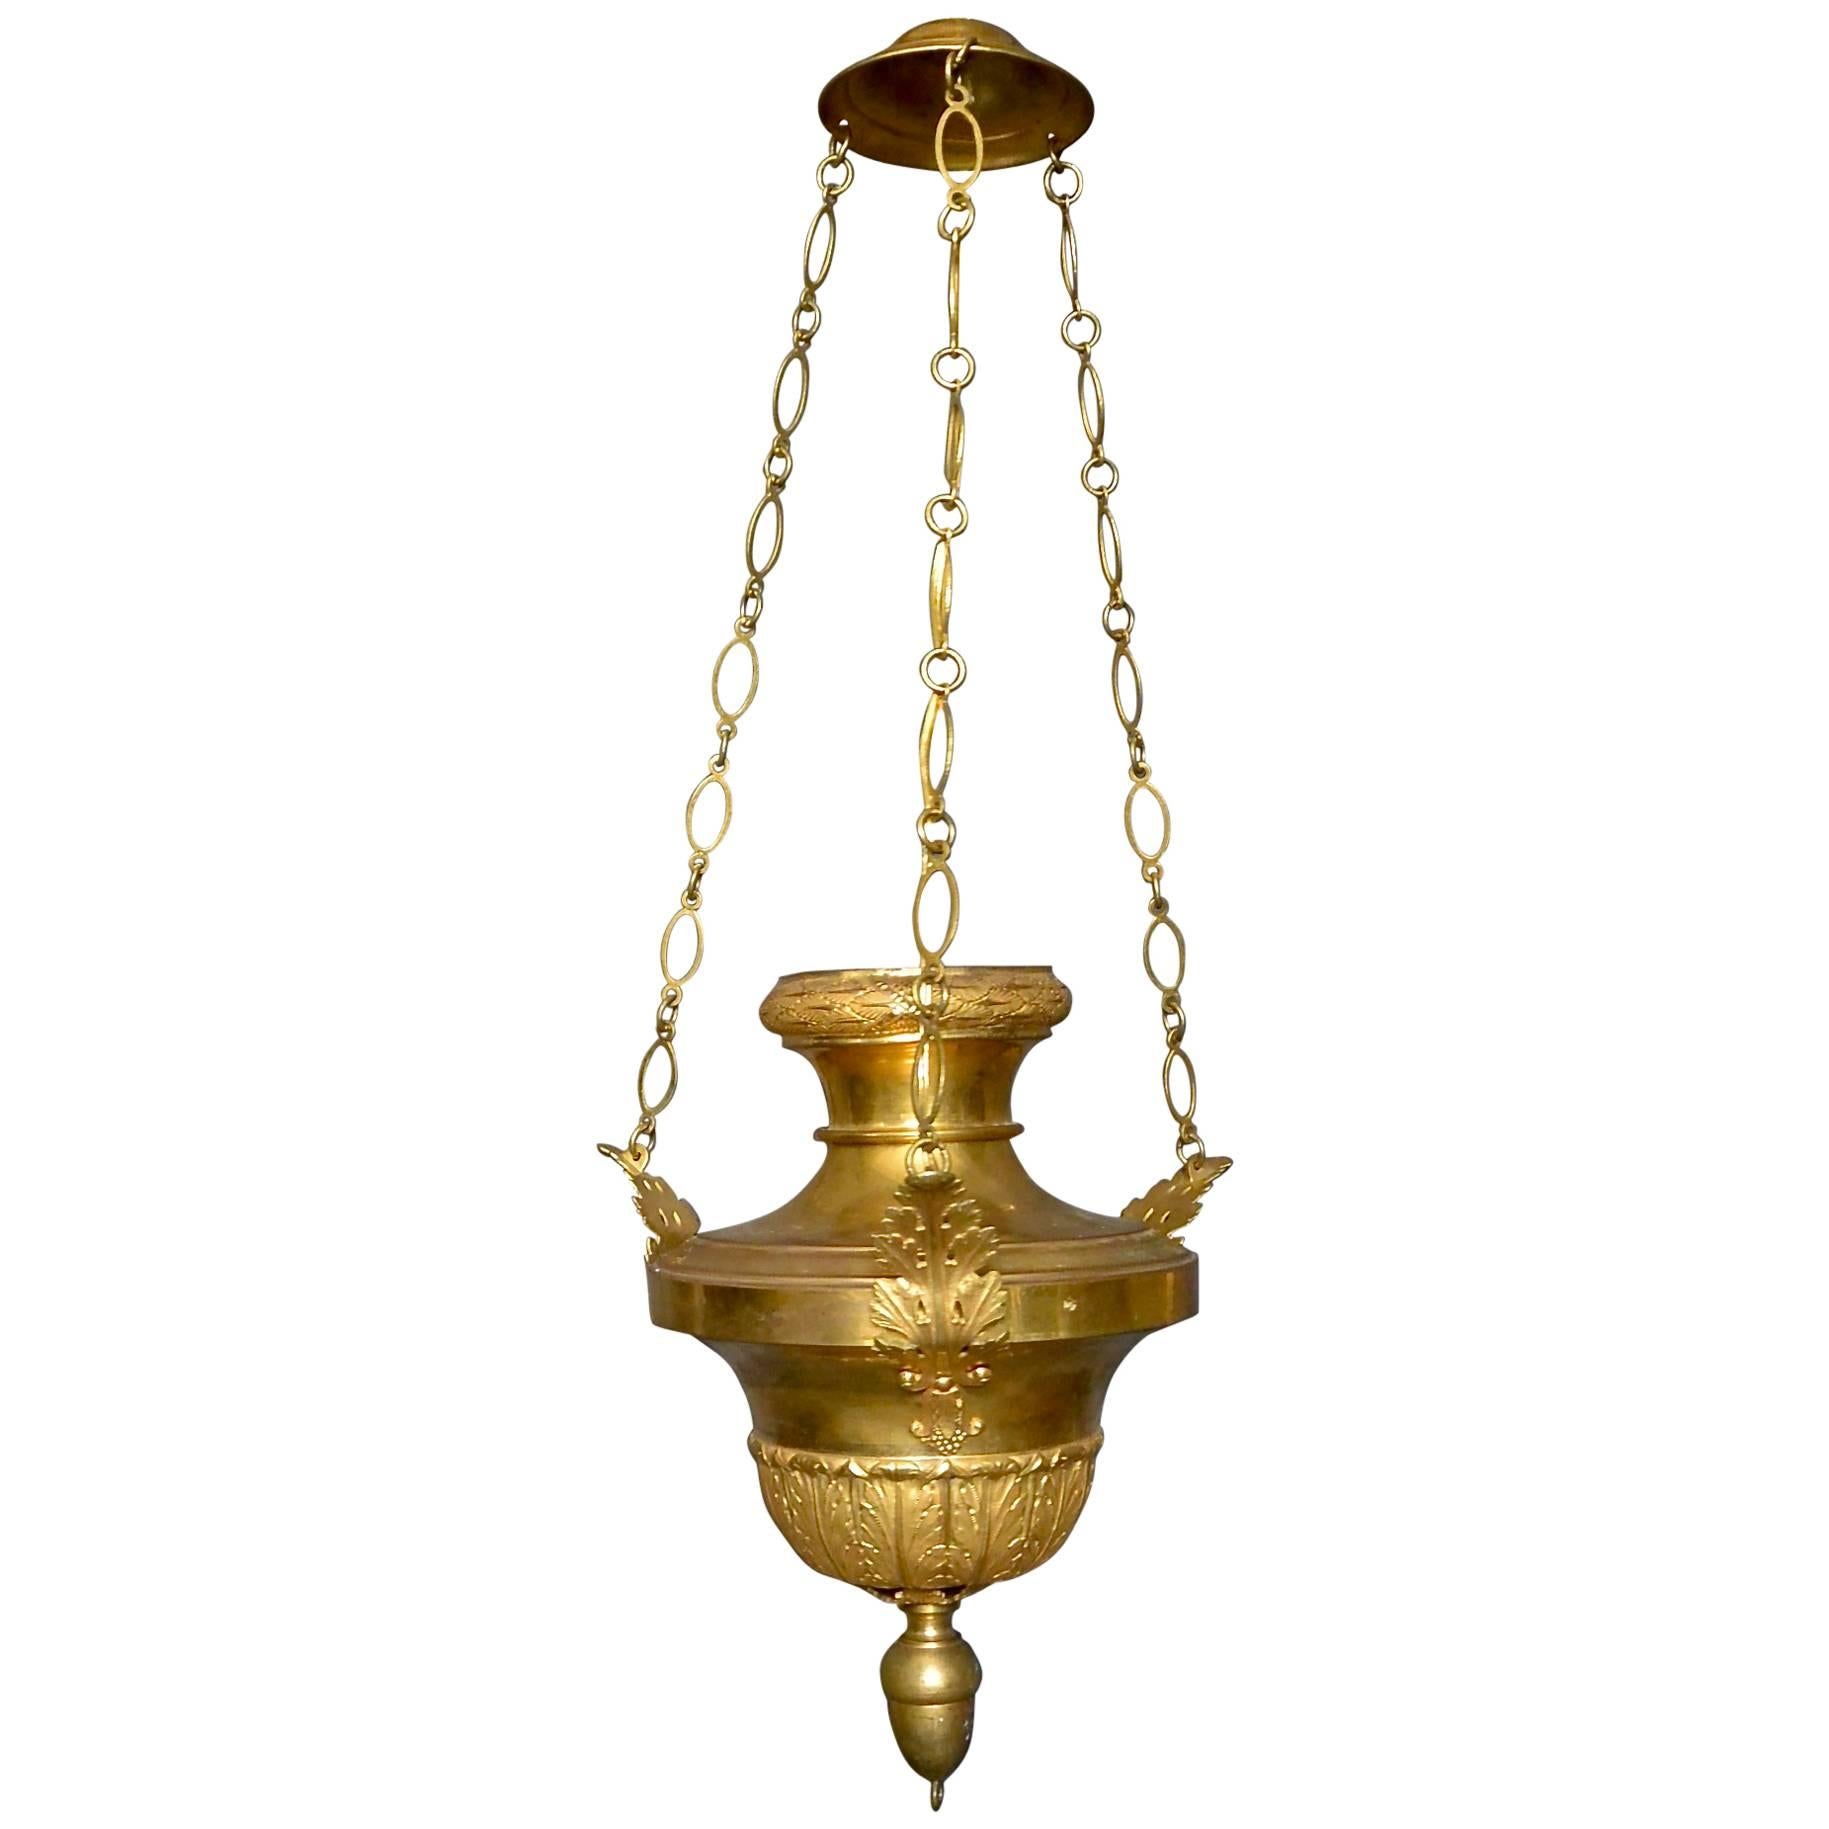 Italian Neoclassical gilt brass pendant. Italian neoclassical gilt brass pendant fixture of Louis XVI urn oil lamp form / incense burner with foliate rim and acanthus arms suspended from gilt chains terminating in an acorn finial at base. Newly